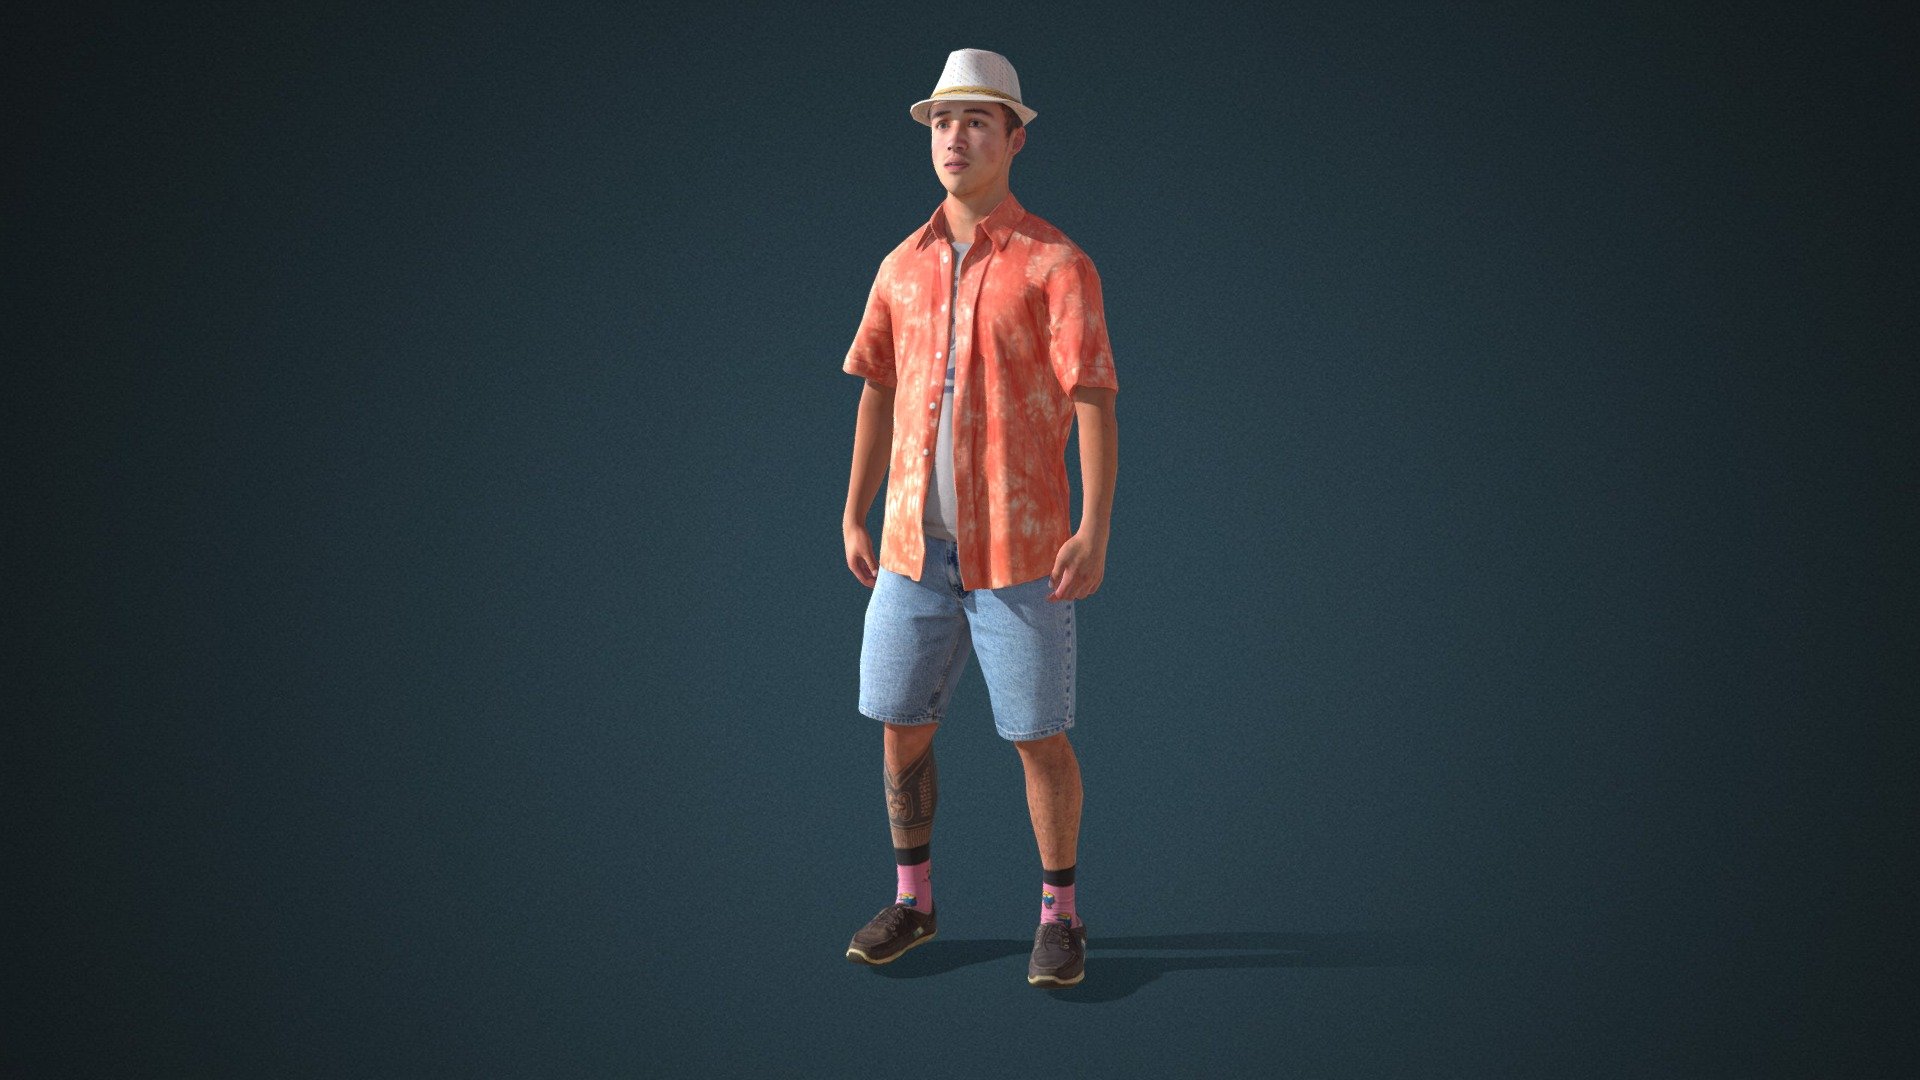 Do you like this model?  Free Download more models, motions and auto rigging tool AccuRIG (Value: $150+) on ActorCore
 

This model includes 2 mocap animations: Modern_M_Idle,Male_walk. Get more free motions

Design for high-performance crowd animation.

Buy full pack and Save 20%+: Beachwear Vol.2


SPECIFICATIONS

✔ Geometry : 7K~10K Quads, one mesh

✔ Material : One material with changeable colors.

✔ Texture Resolution : 4K

✔ Shader : PBR, Diffuse, Normal, Roughness, Metallic, Opacity

✔ Rigged : Facial and Body (shoulders, fingers, toes, eyeballs, jaw)

✔ Blendshape : 122 for facial expressions and lipsync

✔ Compatible with iClone AccuLips, Facial ExPlus, and traditional lip-sync.


About Reallusion ActorCore

ActorCore offers the highest quality 3D asset libraries for mocap motions and animated 3D humans for crowd rendering 3d model